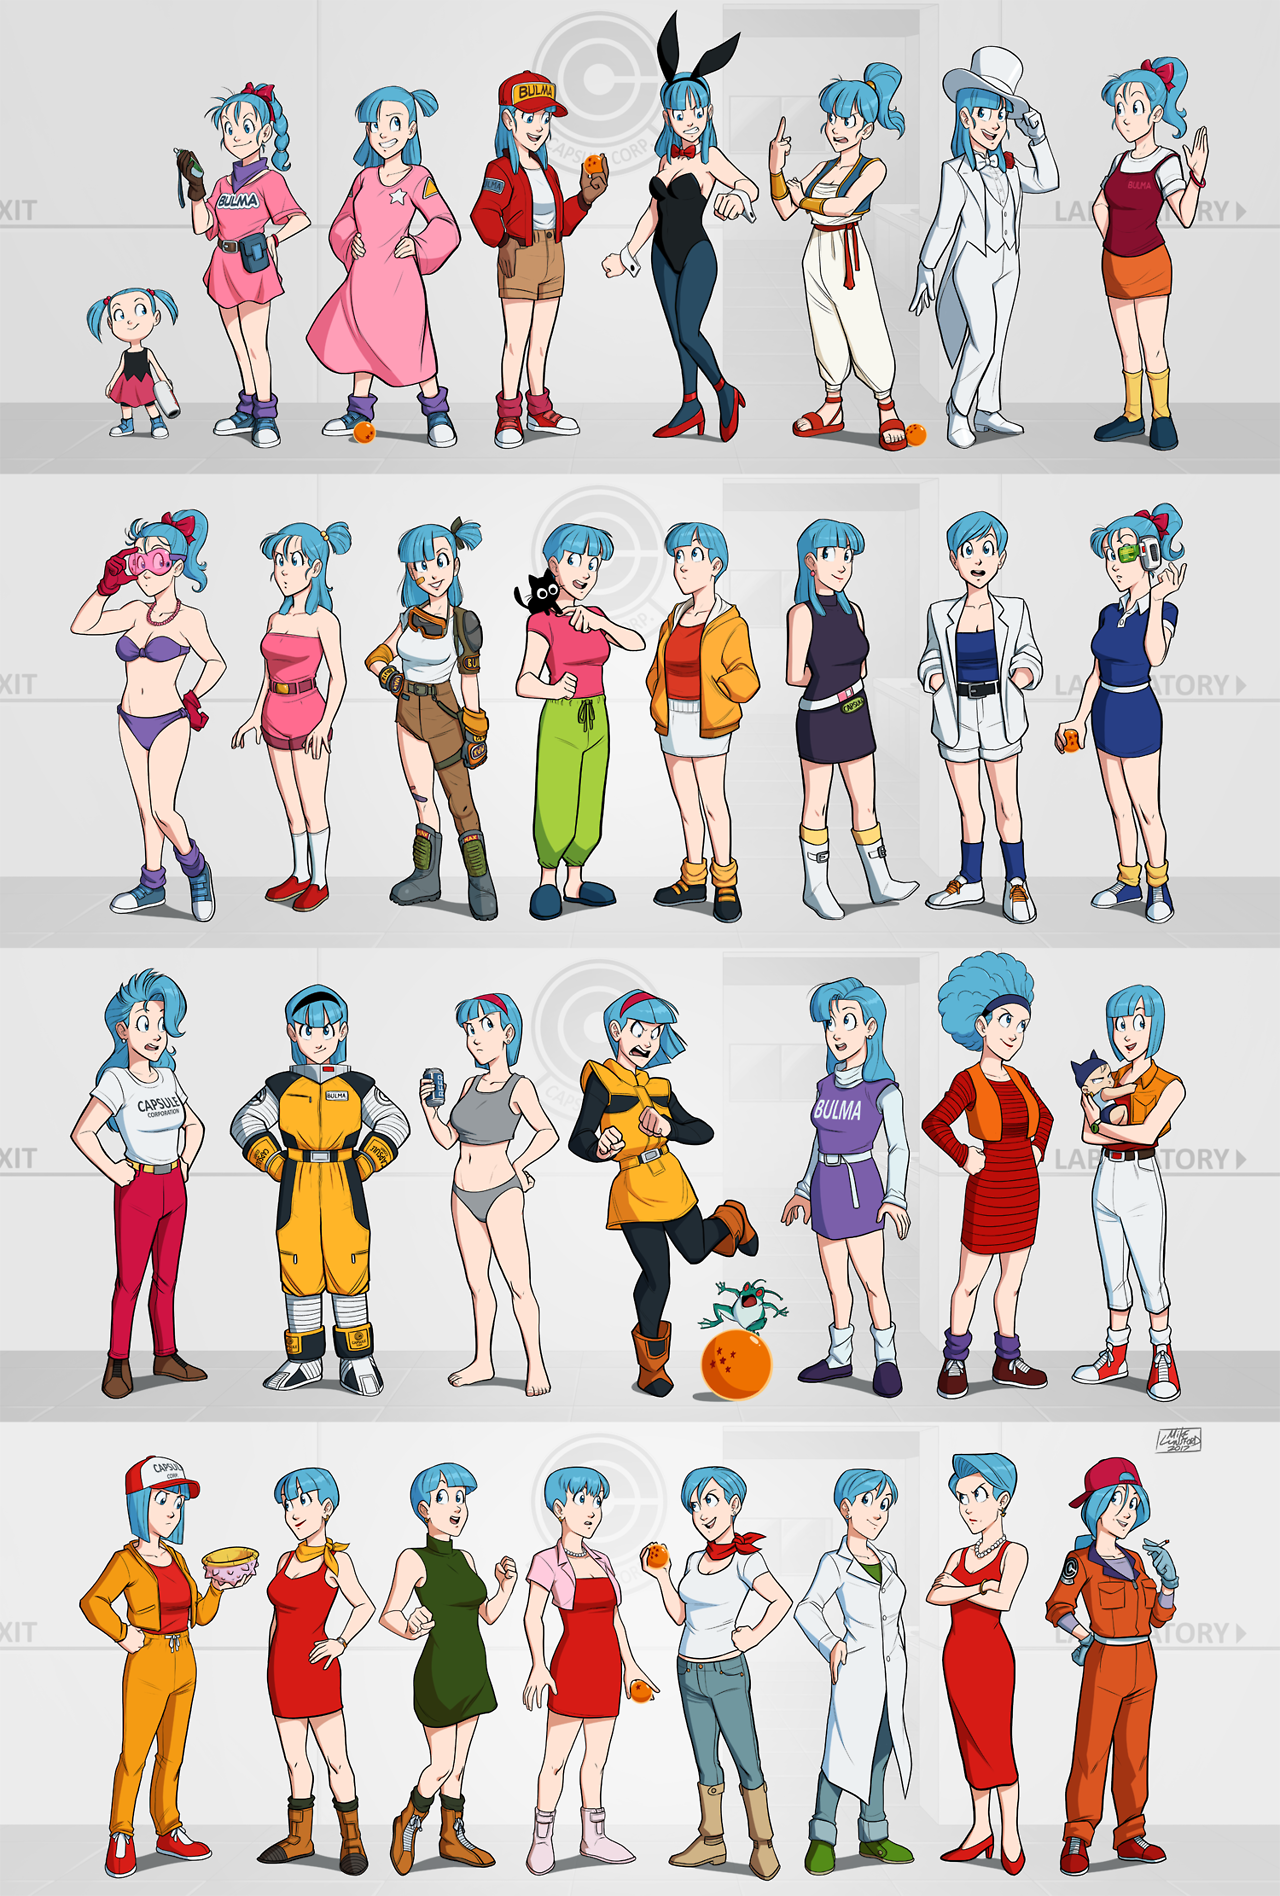 pulp-punk: I drew 32 versions of Bulma, all are costumes taken from Dragon Ball,